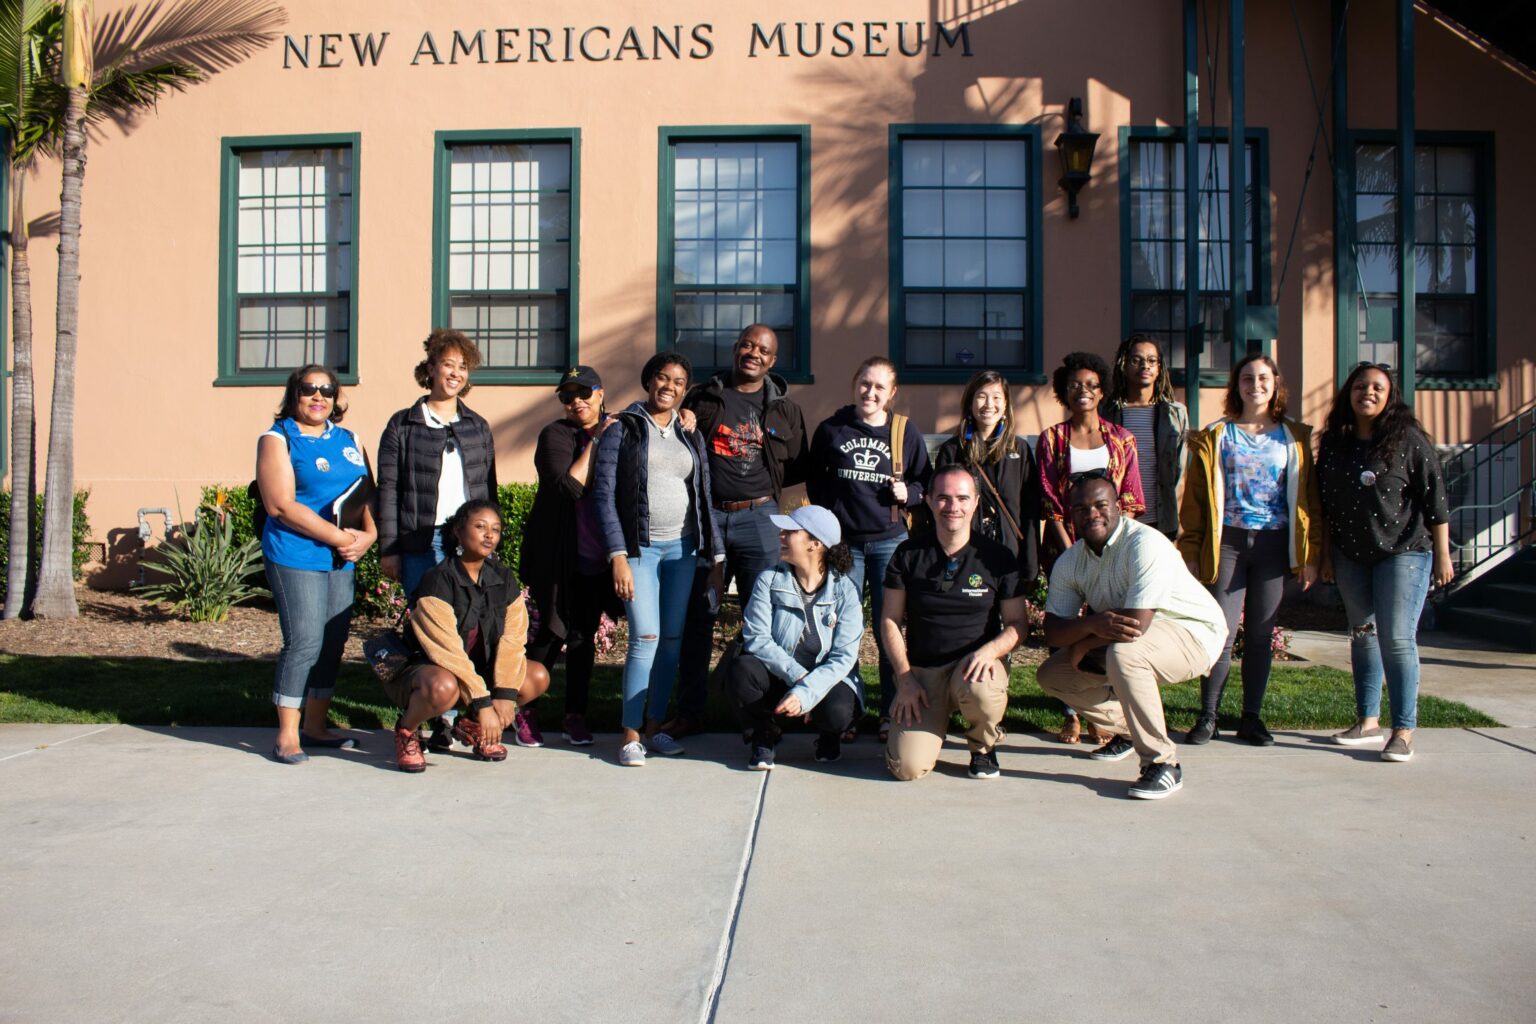 Kalin (far left) and Blean (2nd from left) in front of the New Americans Museum in San Diego